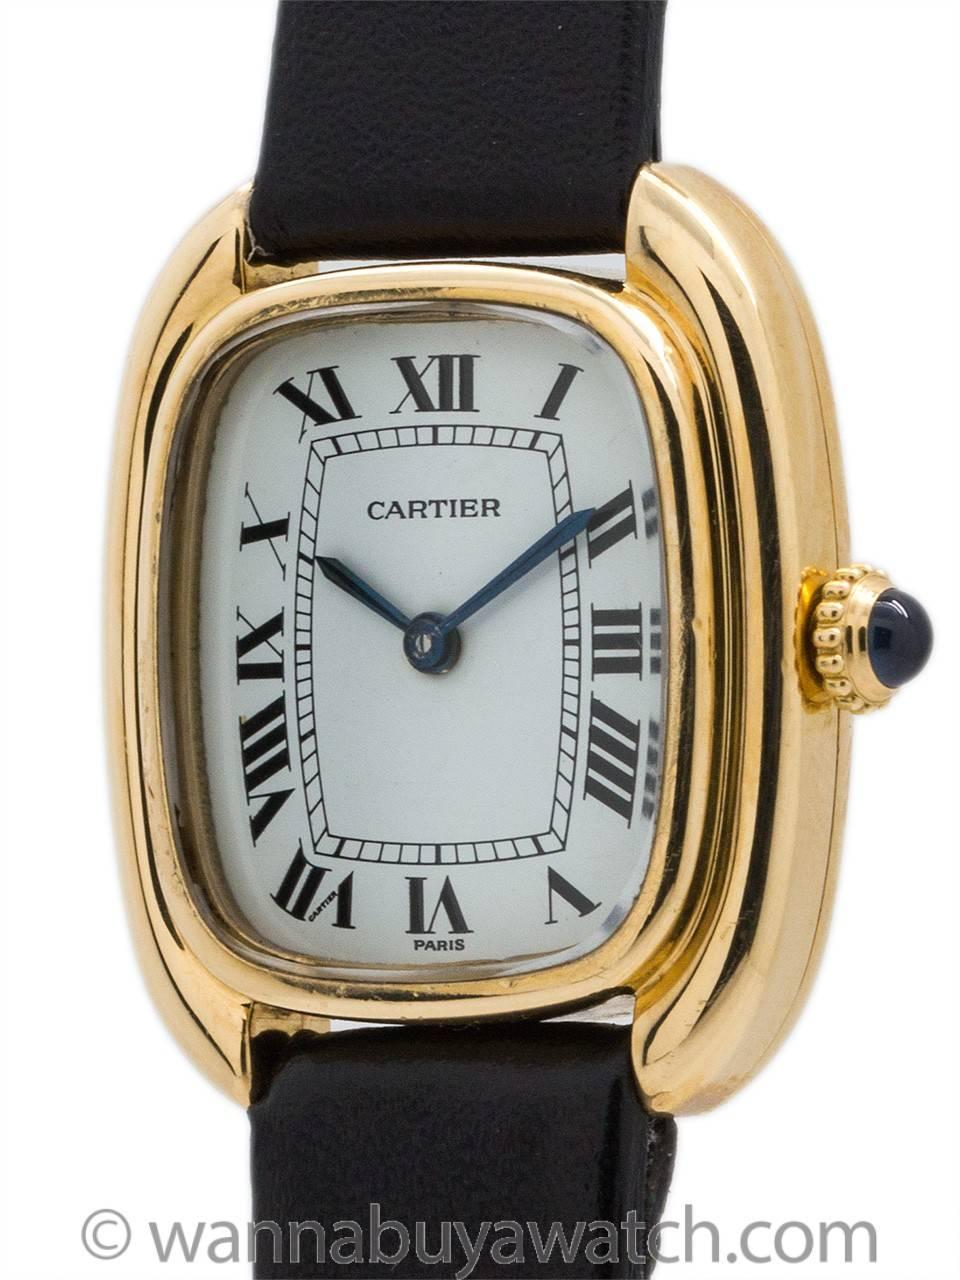 Cartier 18K gold lady's Gondole model circa 1973. Scarce and great looking elongated cushion shaped case with rounded and wide stepped bezel. With mineral glass crystal and original classic glossy white Cartier dial with Roman figures and blued